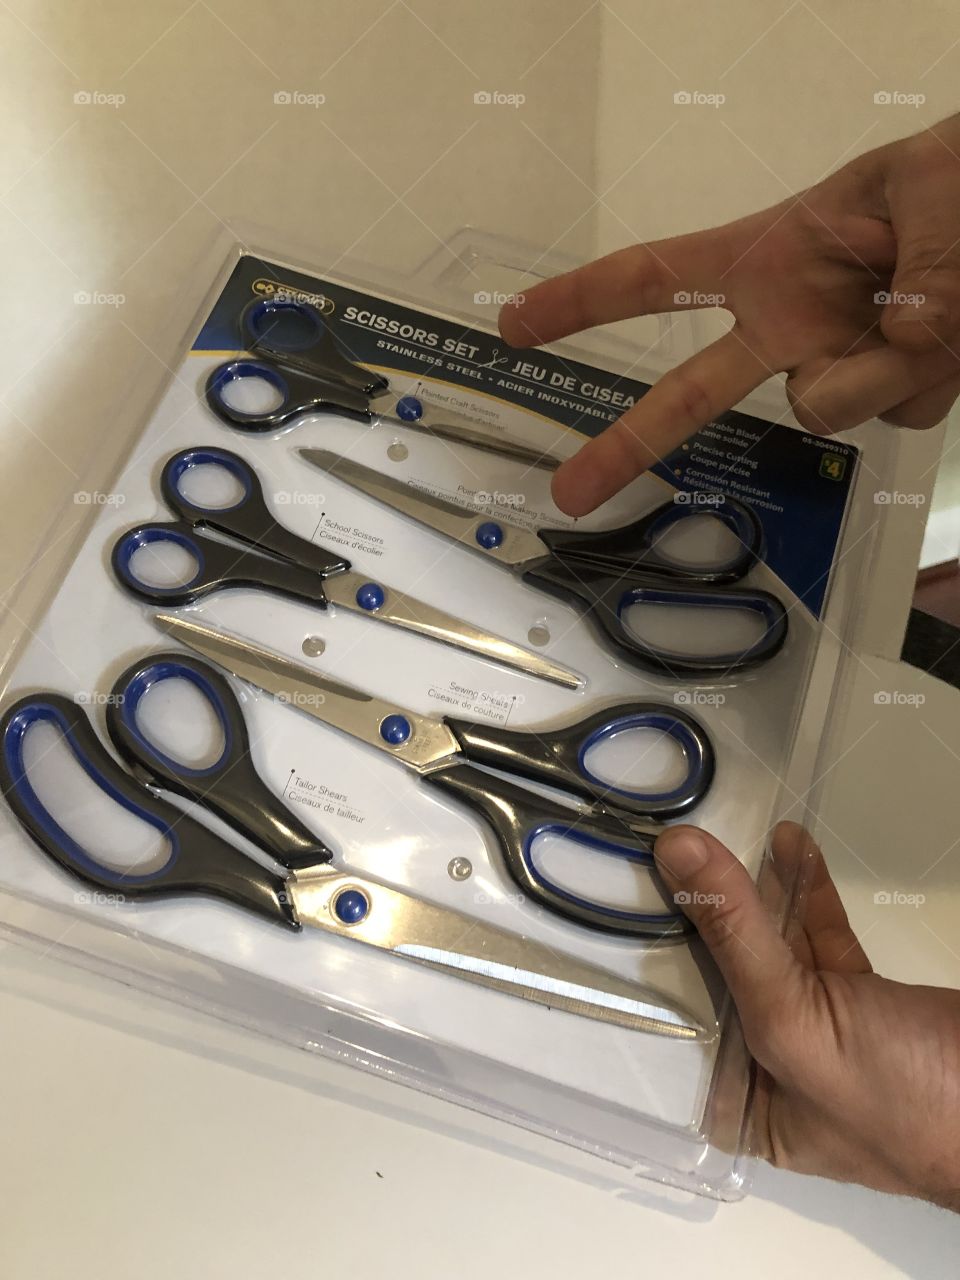 Overpackaged Irony - Needing scissors to cut open your new scissors!